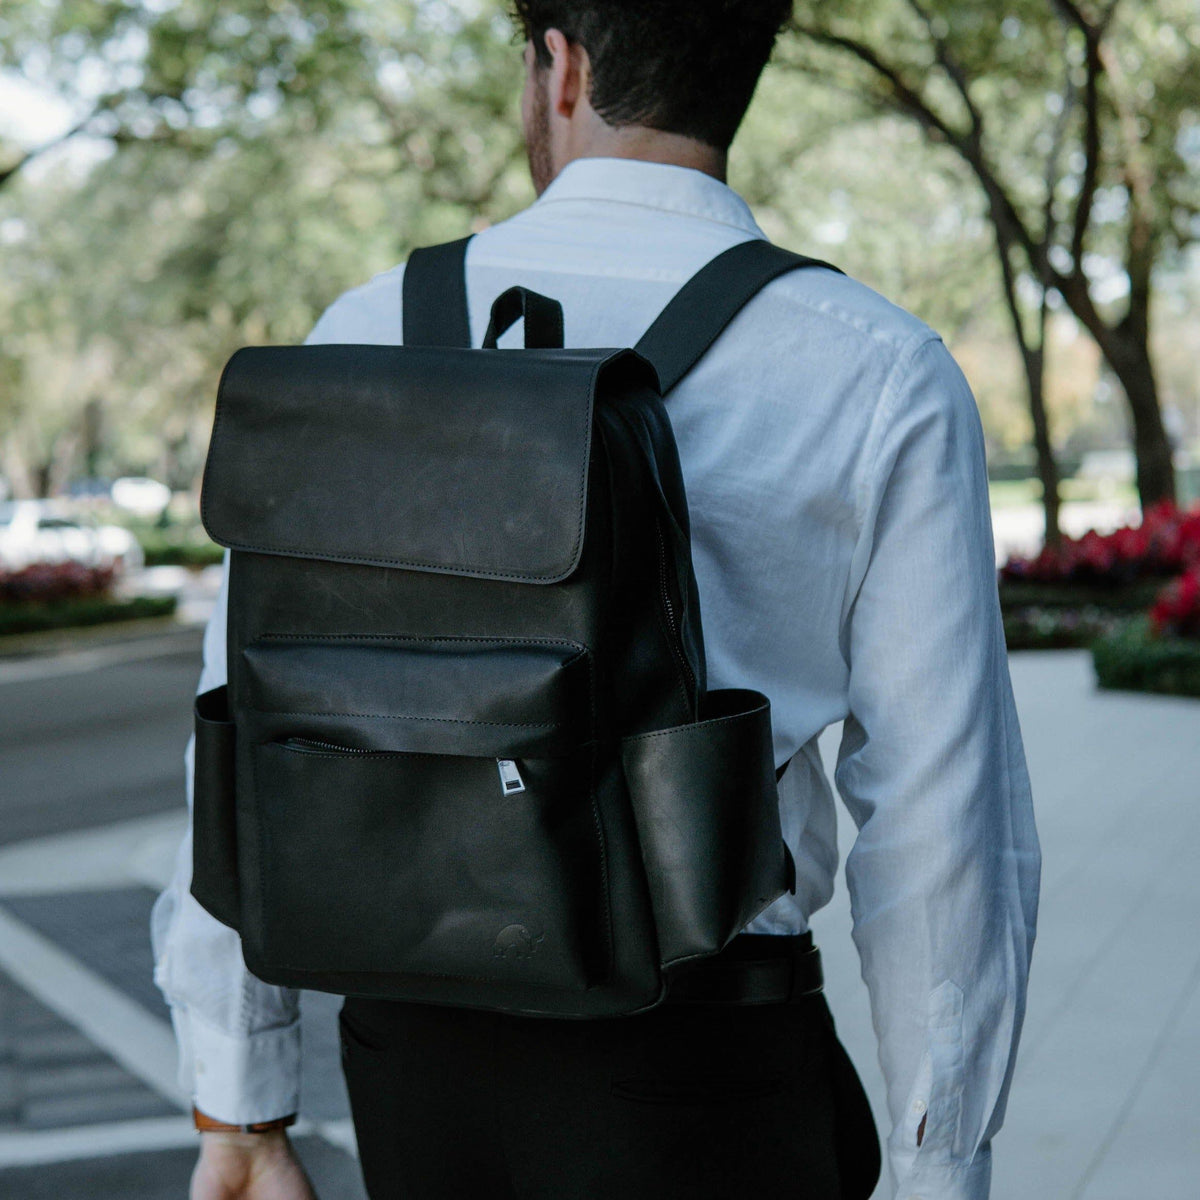 Leather Rugged Backpack - Black Edition by Bullstrap